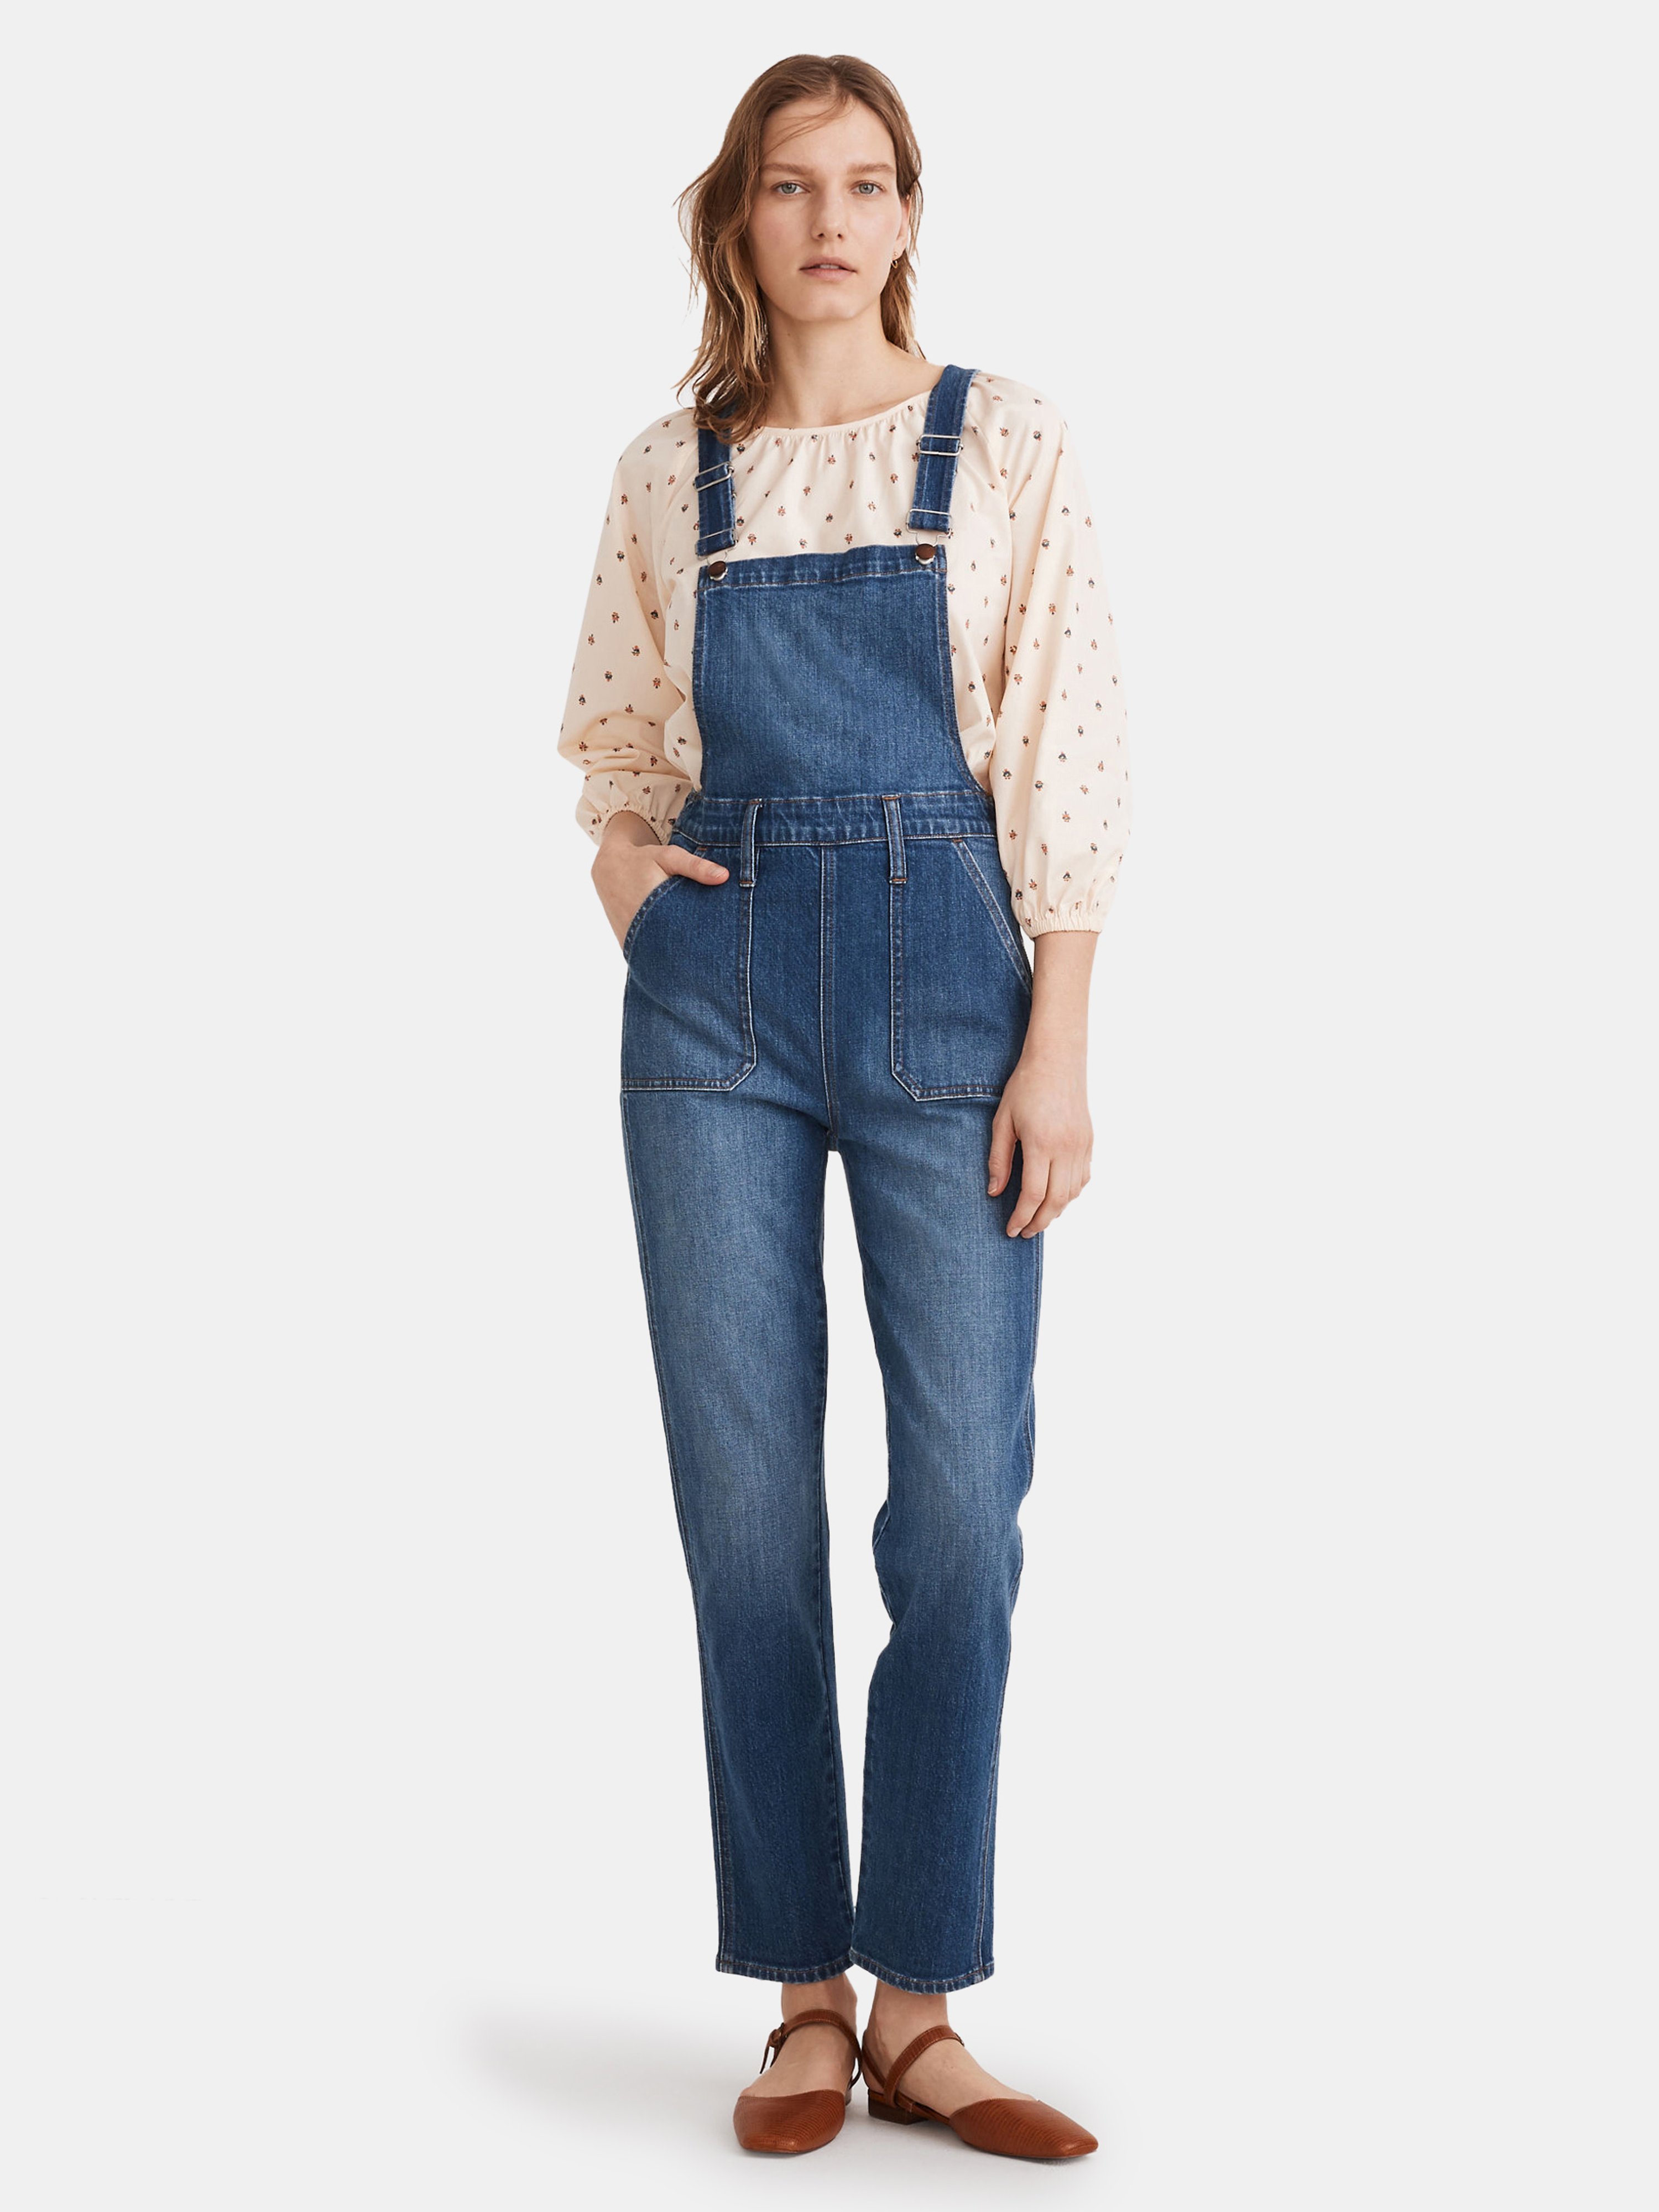 Madewell MADEWELL STOVEPIPE FULL LENGTH STRAIGHT FIT OVERALLS